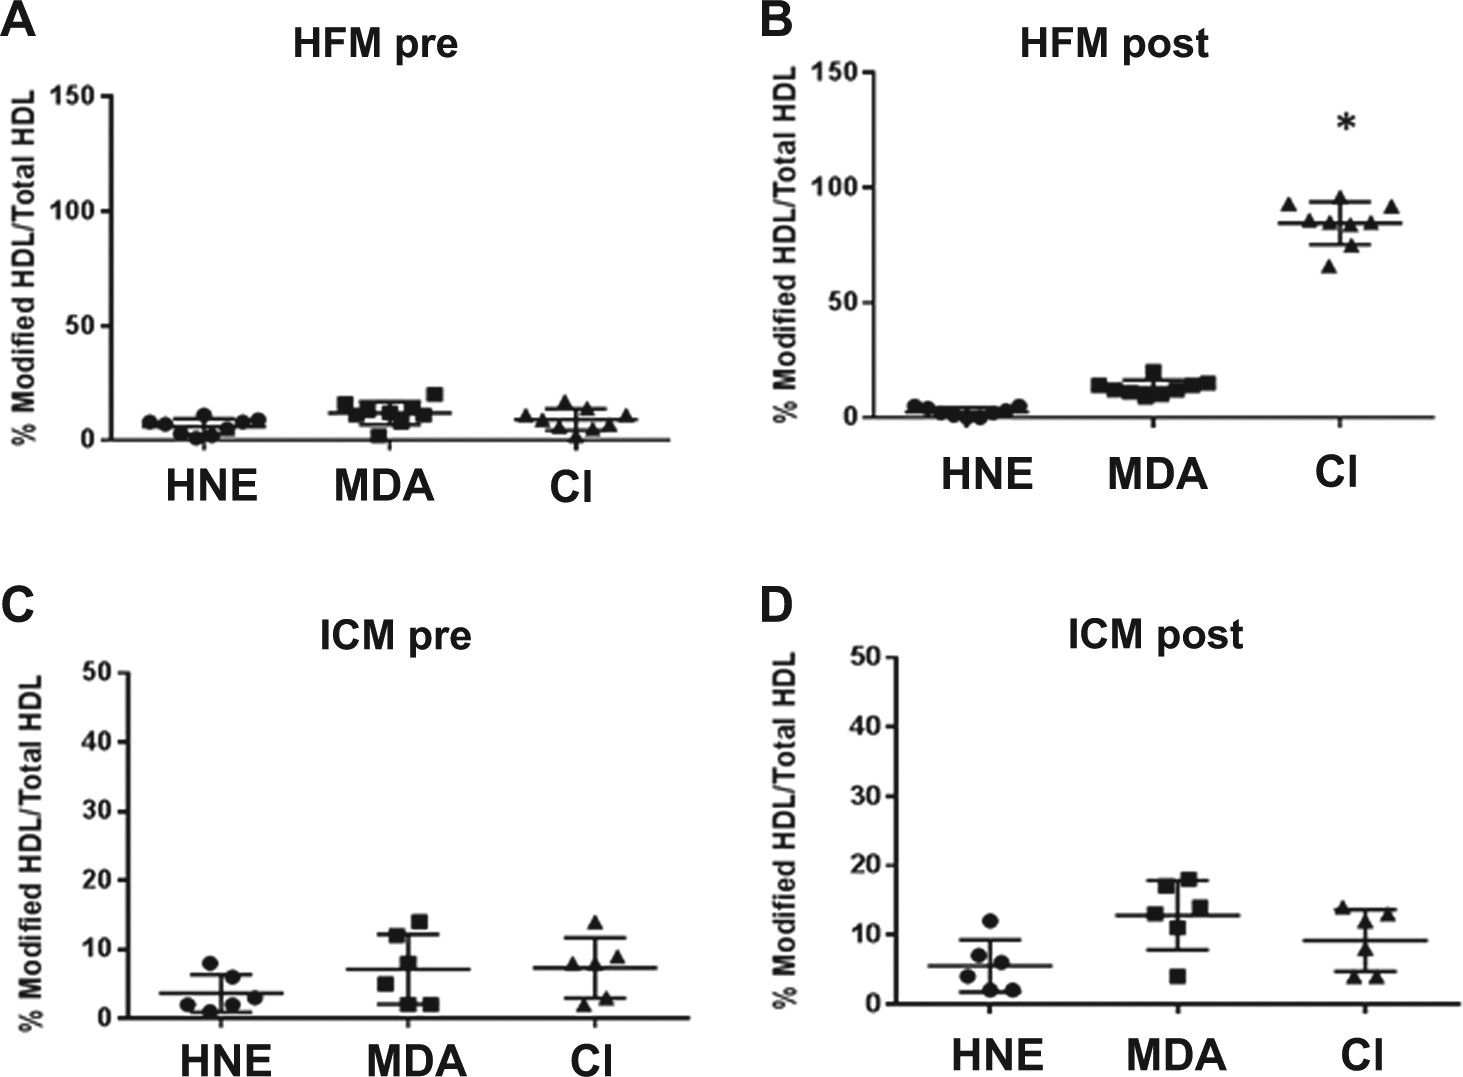 A single high-fat meal provokes pathological erythrocyte remodeling and increases myeloperoxidase levels: implications for acute coronary syndrome.